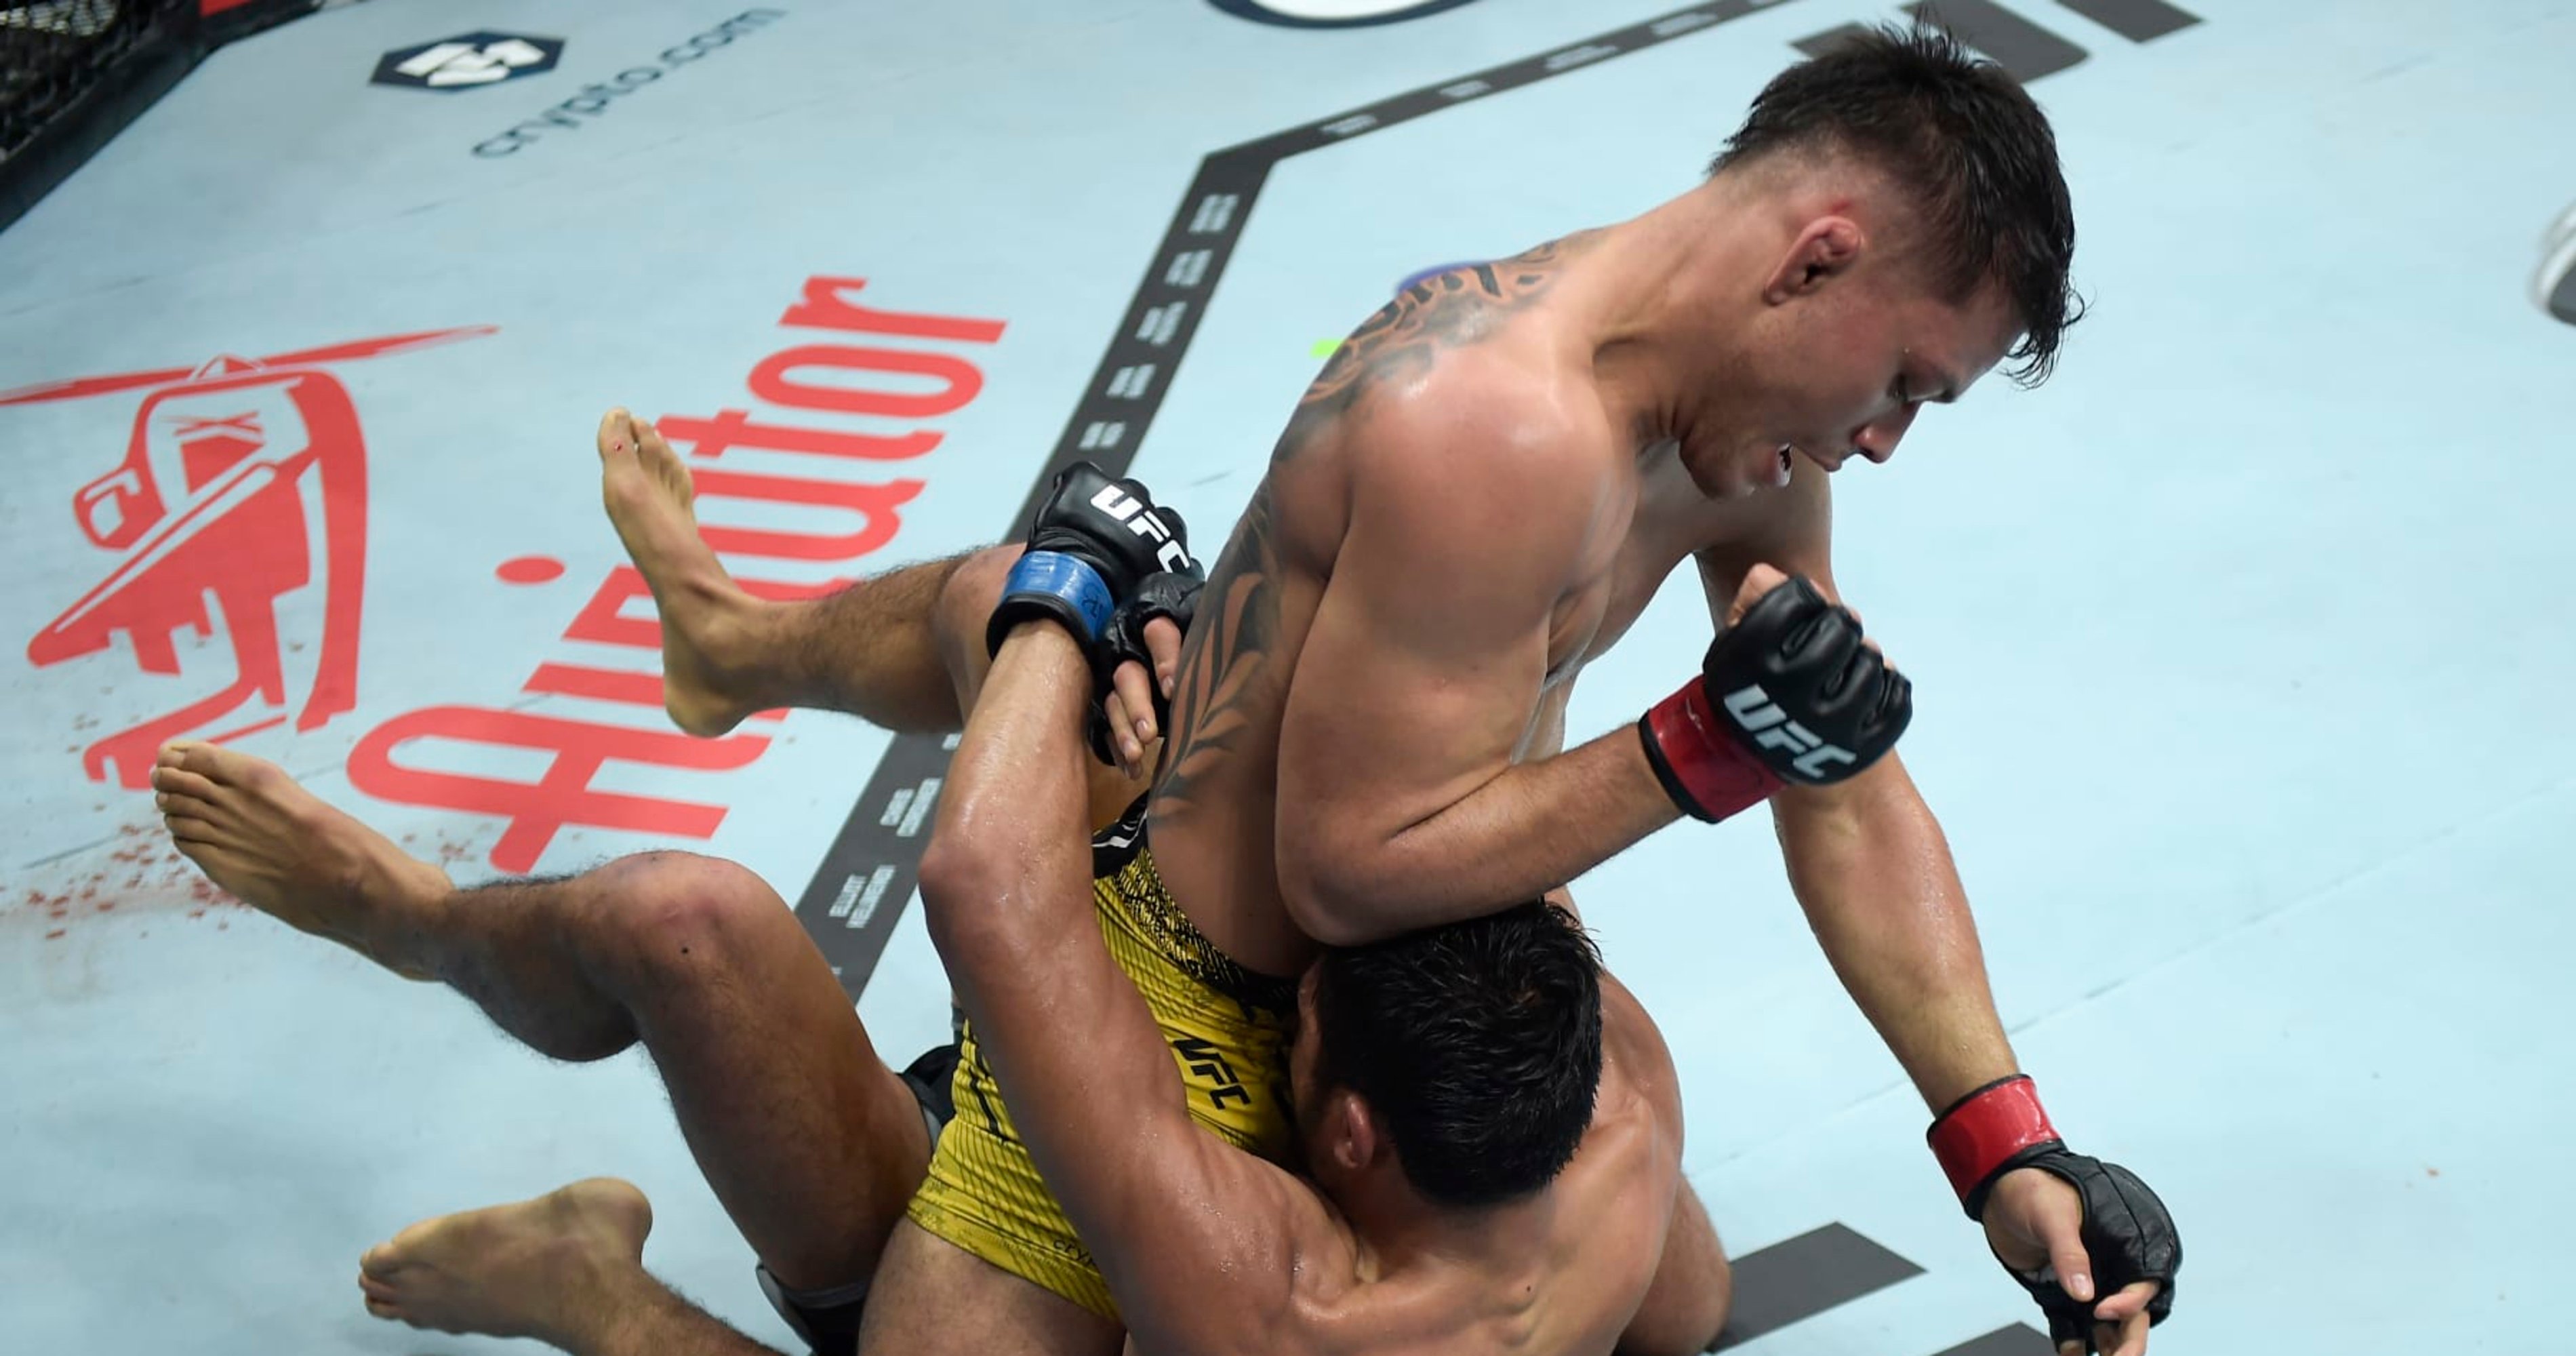 MMA Rule Changes for '12-to-6 Elbow' and 'Downed Fighter' Revealed After ABC Vote